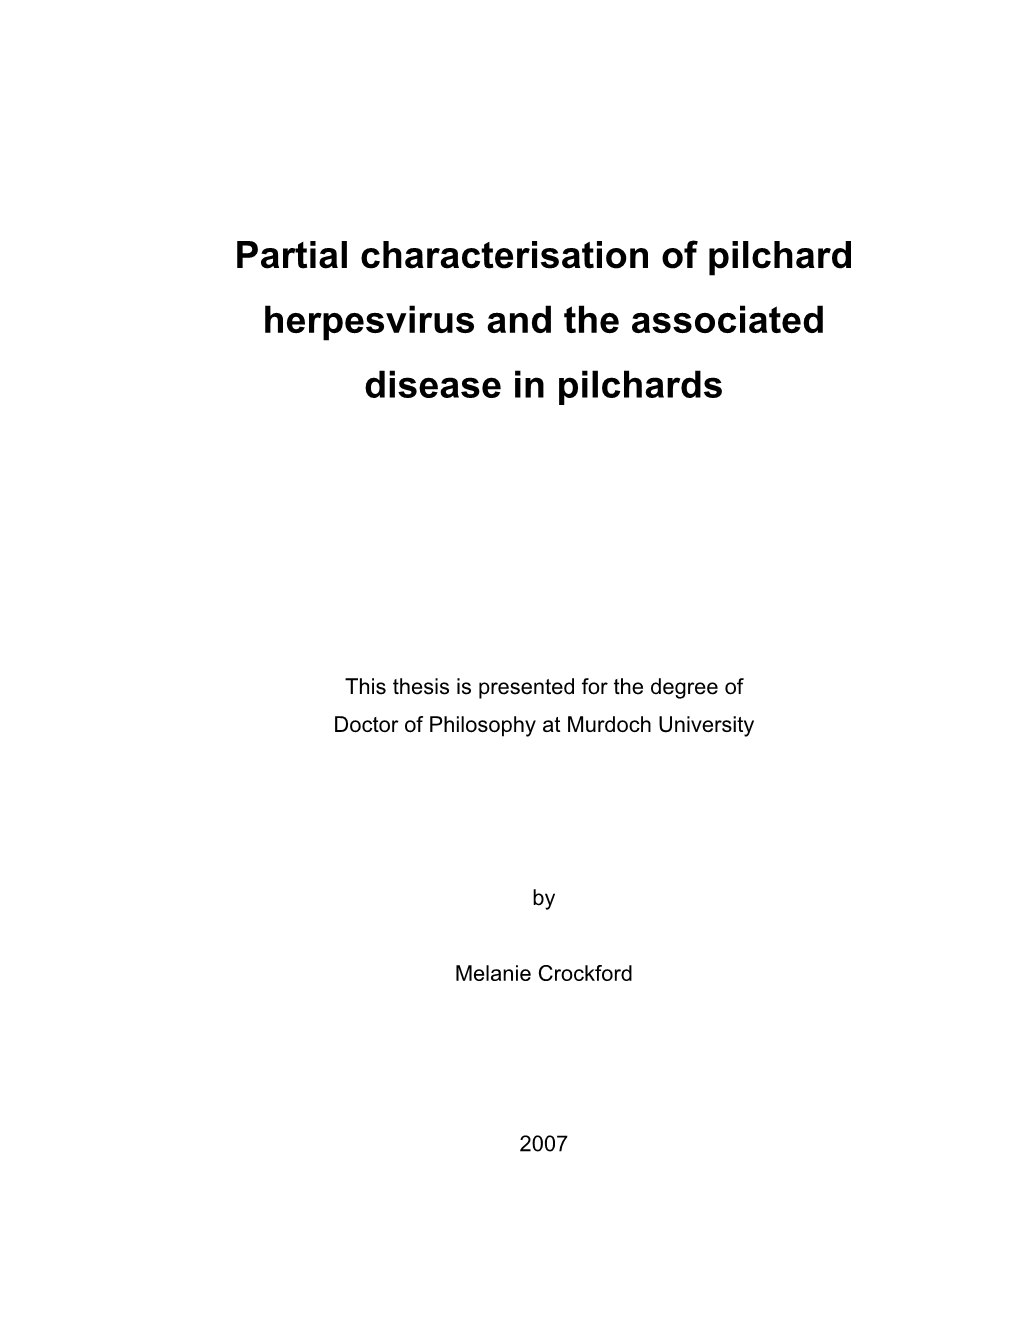 Partial Characterisation of Pilchard Herpesvirus and the Associated Disease in Pilchards